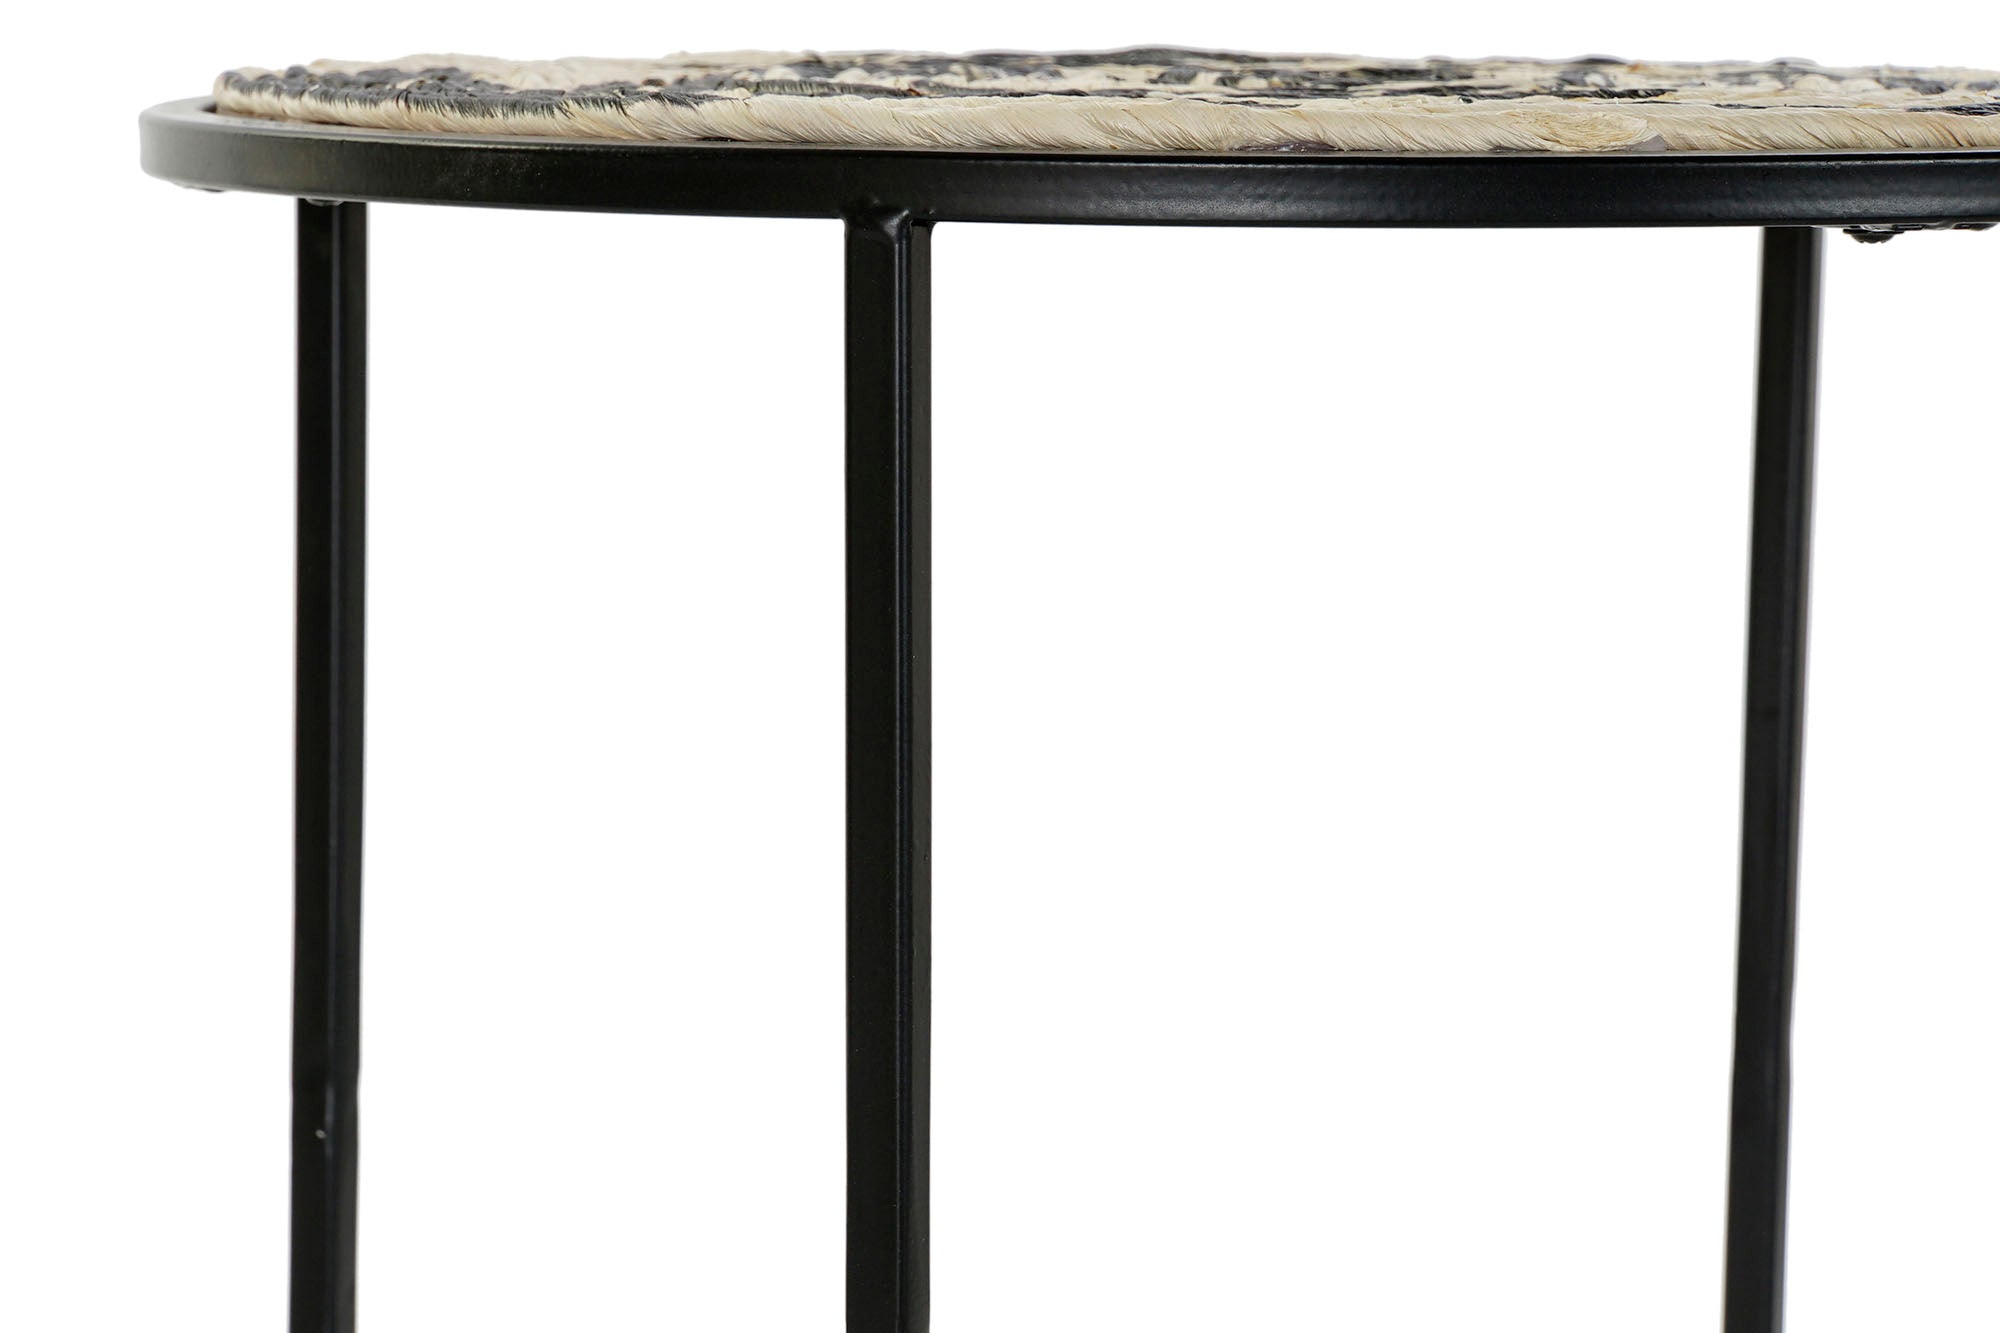 DKD Home Decor Set of 2 auxiliary tables seagrass